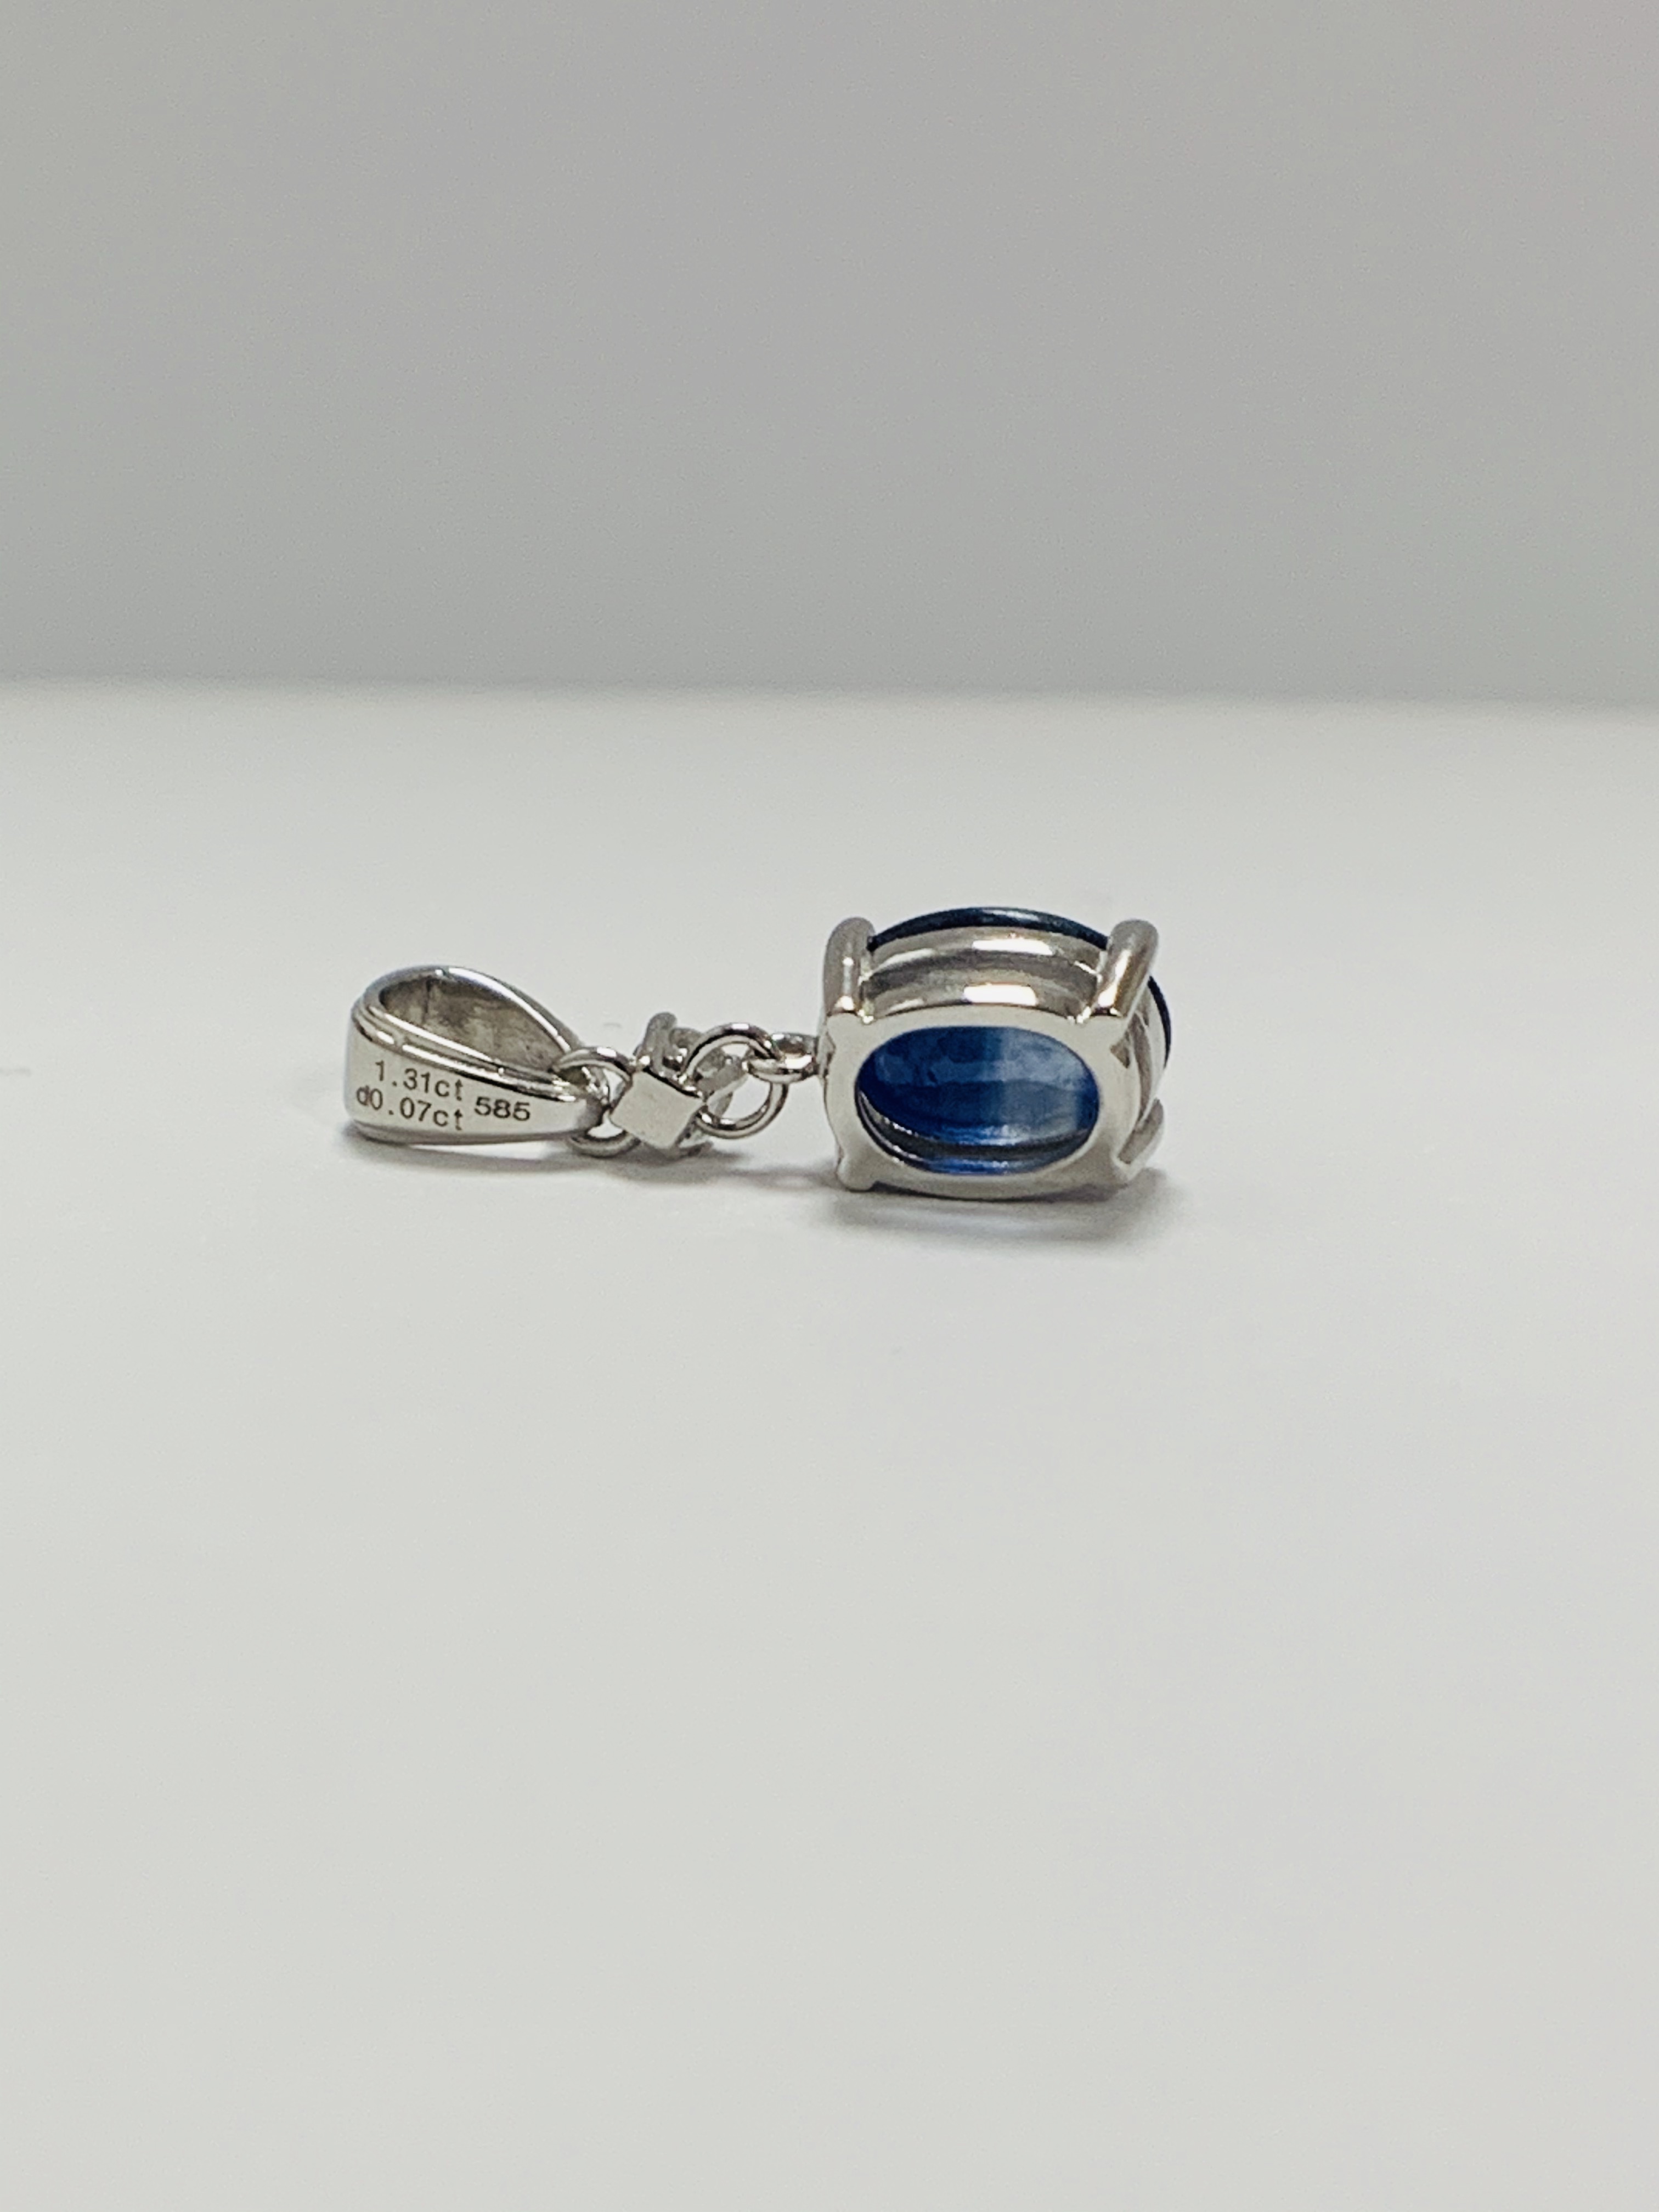 14ct White Gold Sapphire and Diamond pendant featuring oval cut, medium blue Sapphire (1.31ct), 4-cl - Image 5 of 9